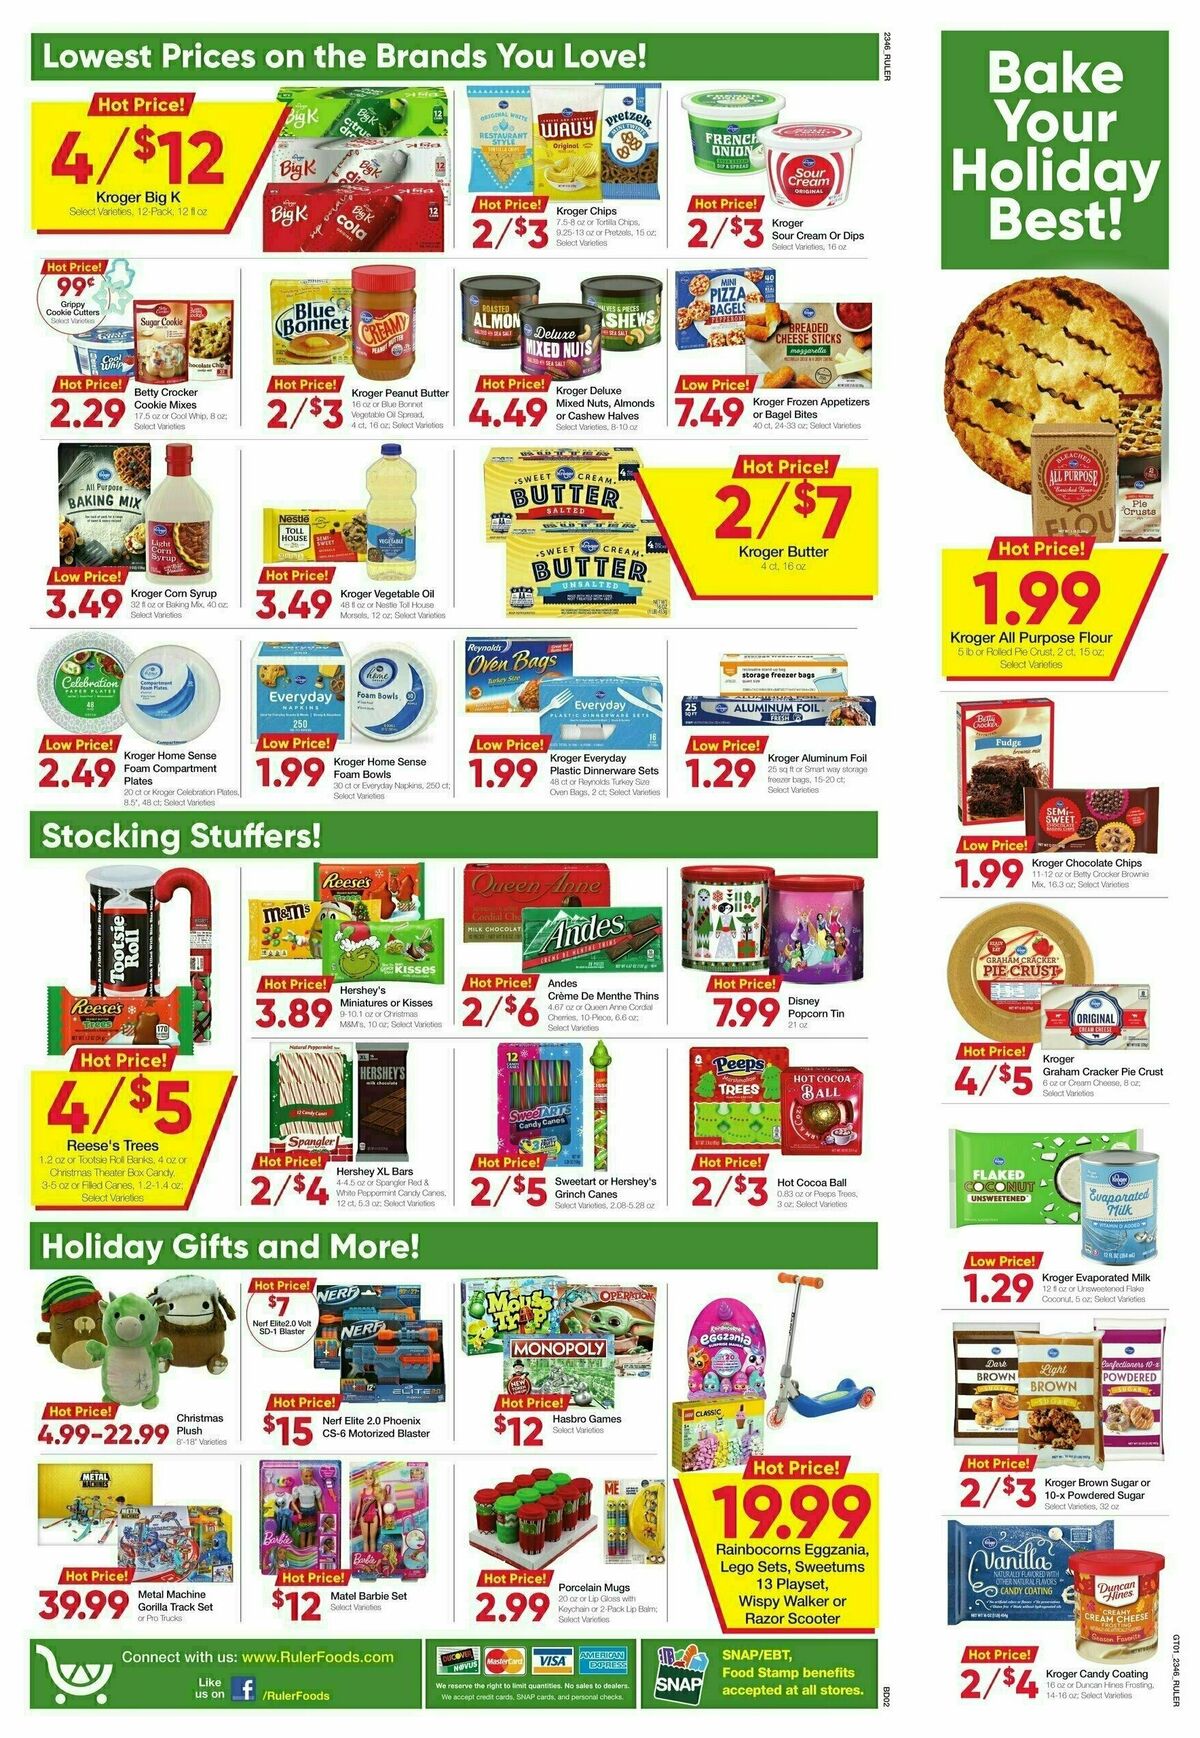 Ruler Foods Weekly Ad from December 13